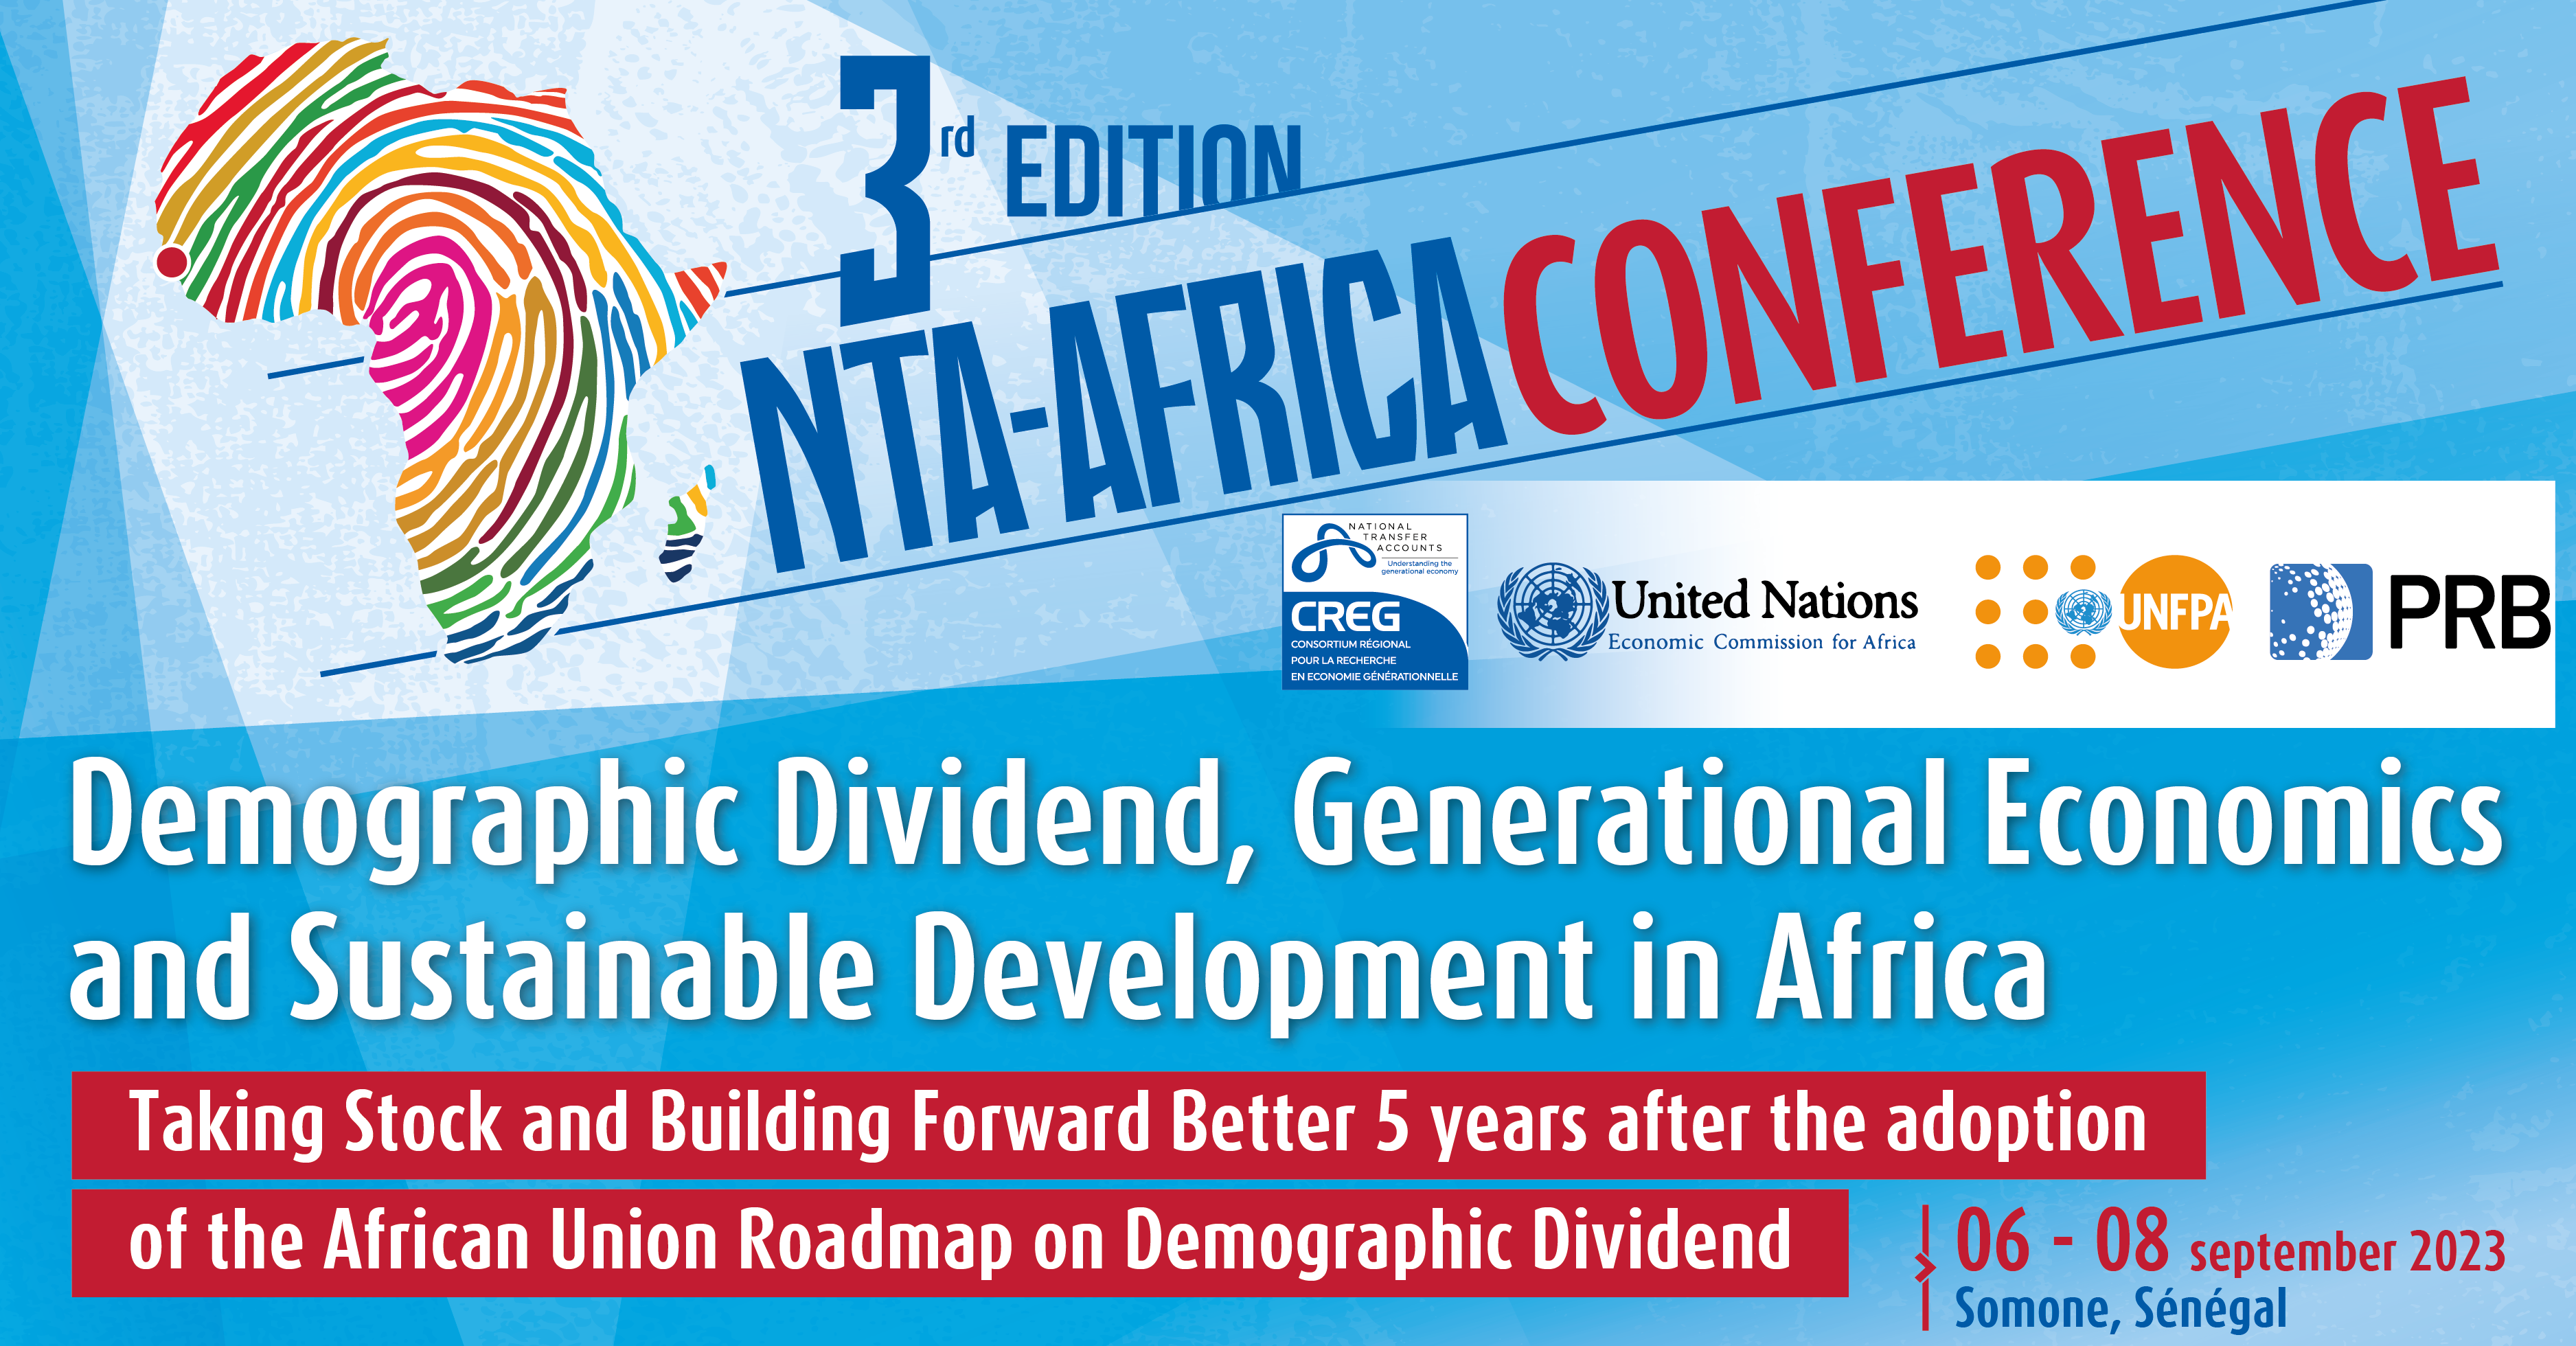 3rd edition NTA-Africa Conference: Demographic Dividend, Generational Economics and Sustainable Development in Africa. Taking Stock and Building Forward Better 5 years after the adoption of the African Union Roadmap on Demographic Dividend.